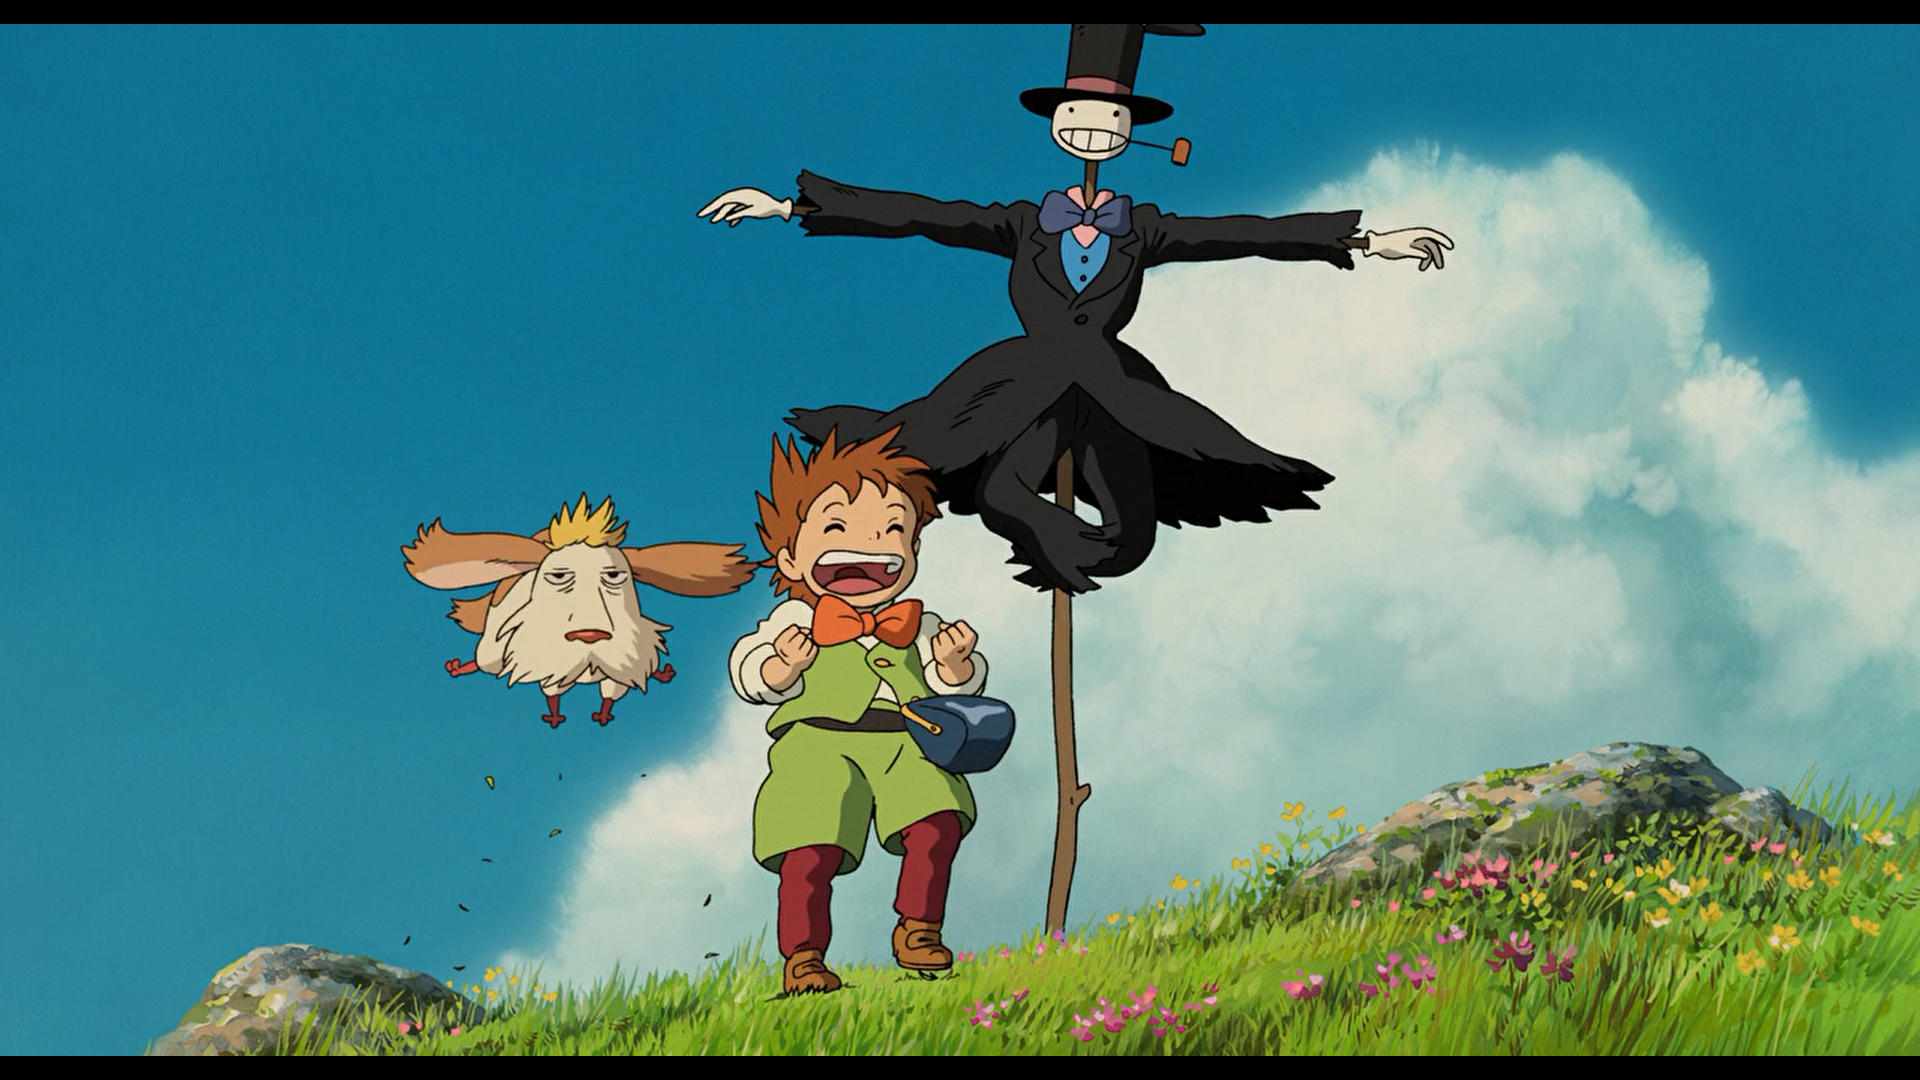 Howls Moving Castle Miyazaki Hayao Clear Sky Grass Rocks Smiling Open Mouth Dog Anime Anime Girls An 1920x1080